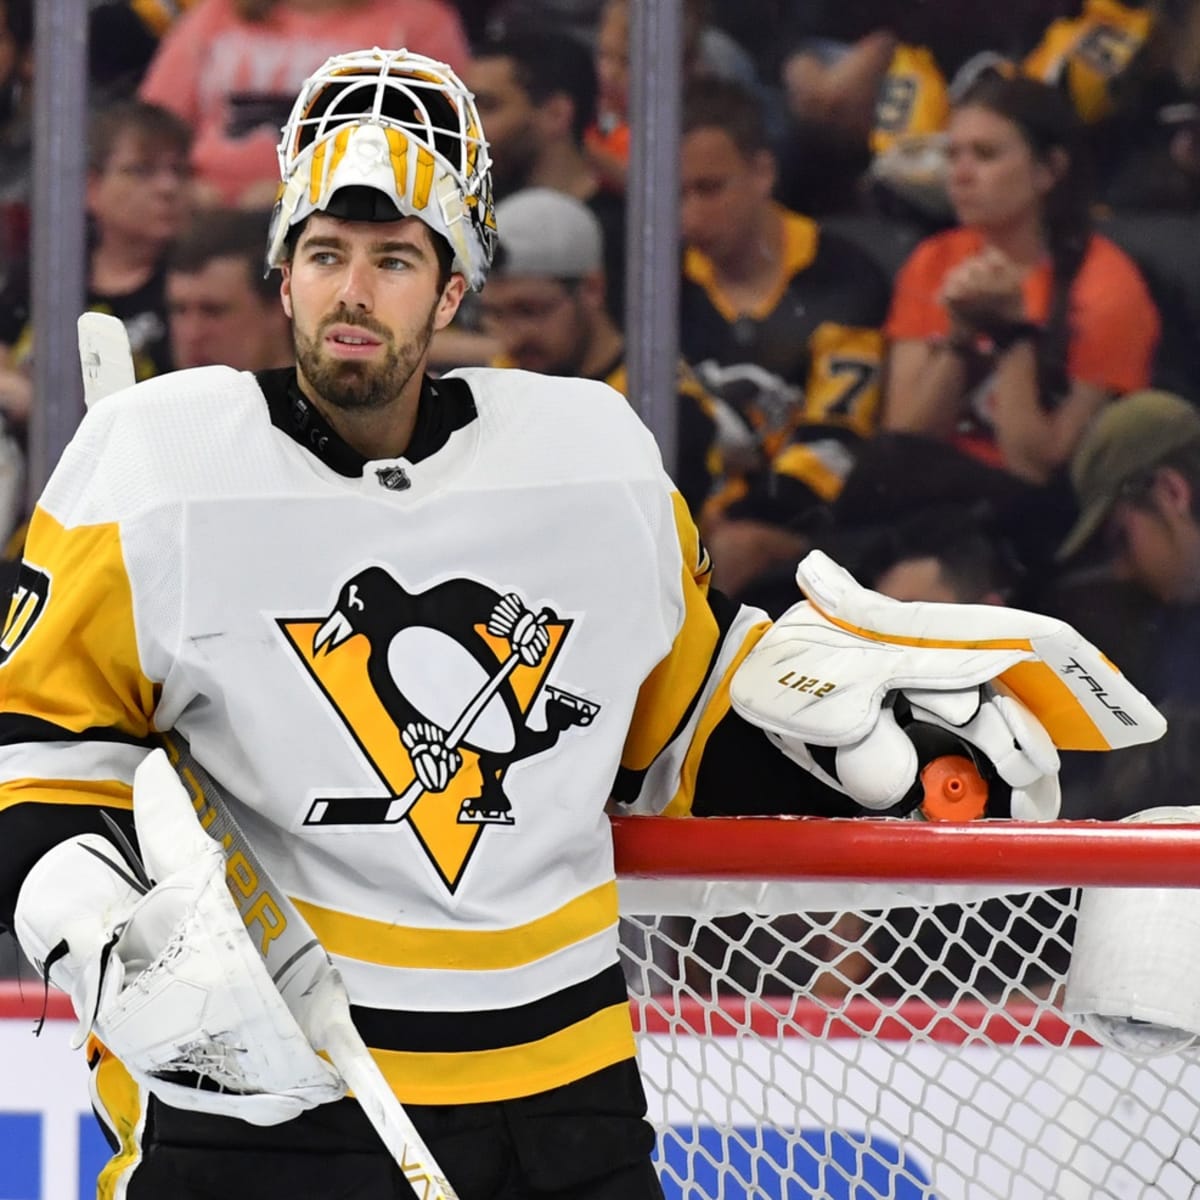 Penguins goalie Domingue claims the crown of Pittsburgh with playoff  performance : NPR